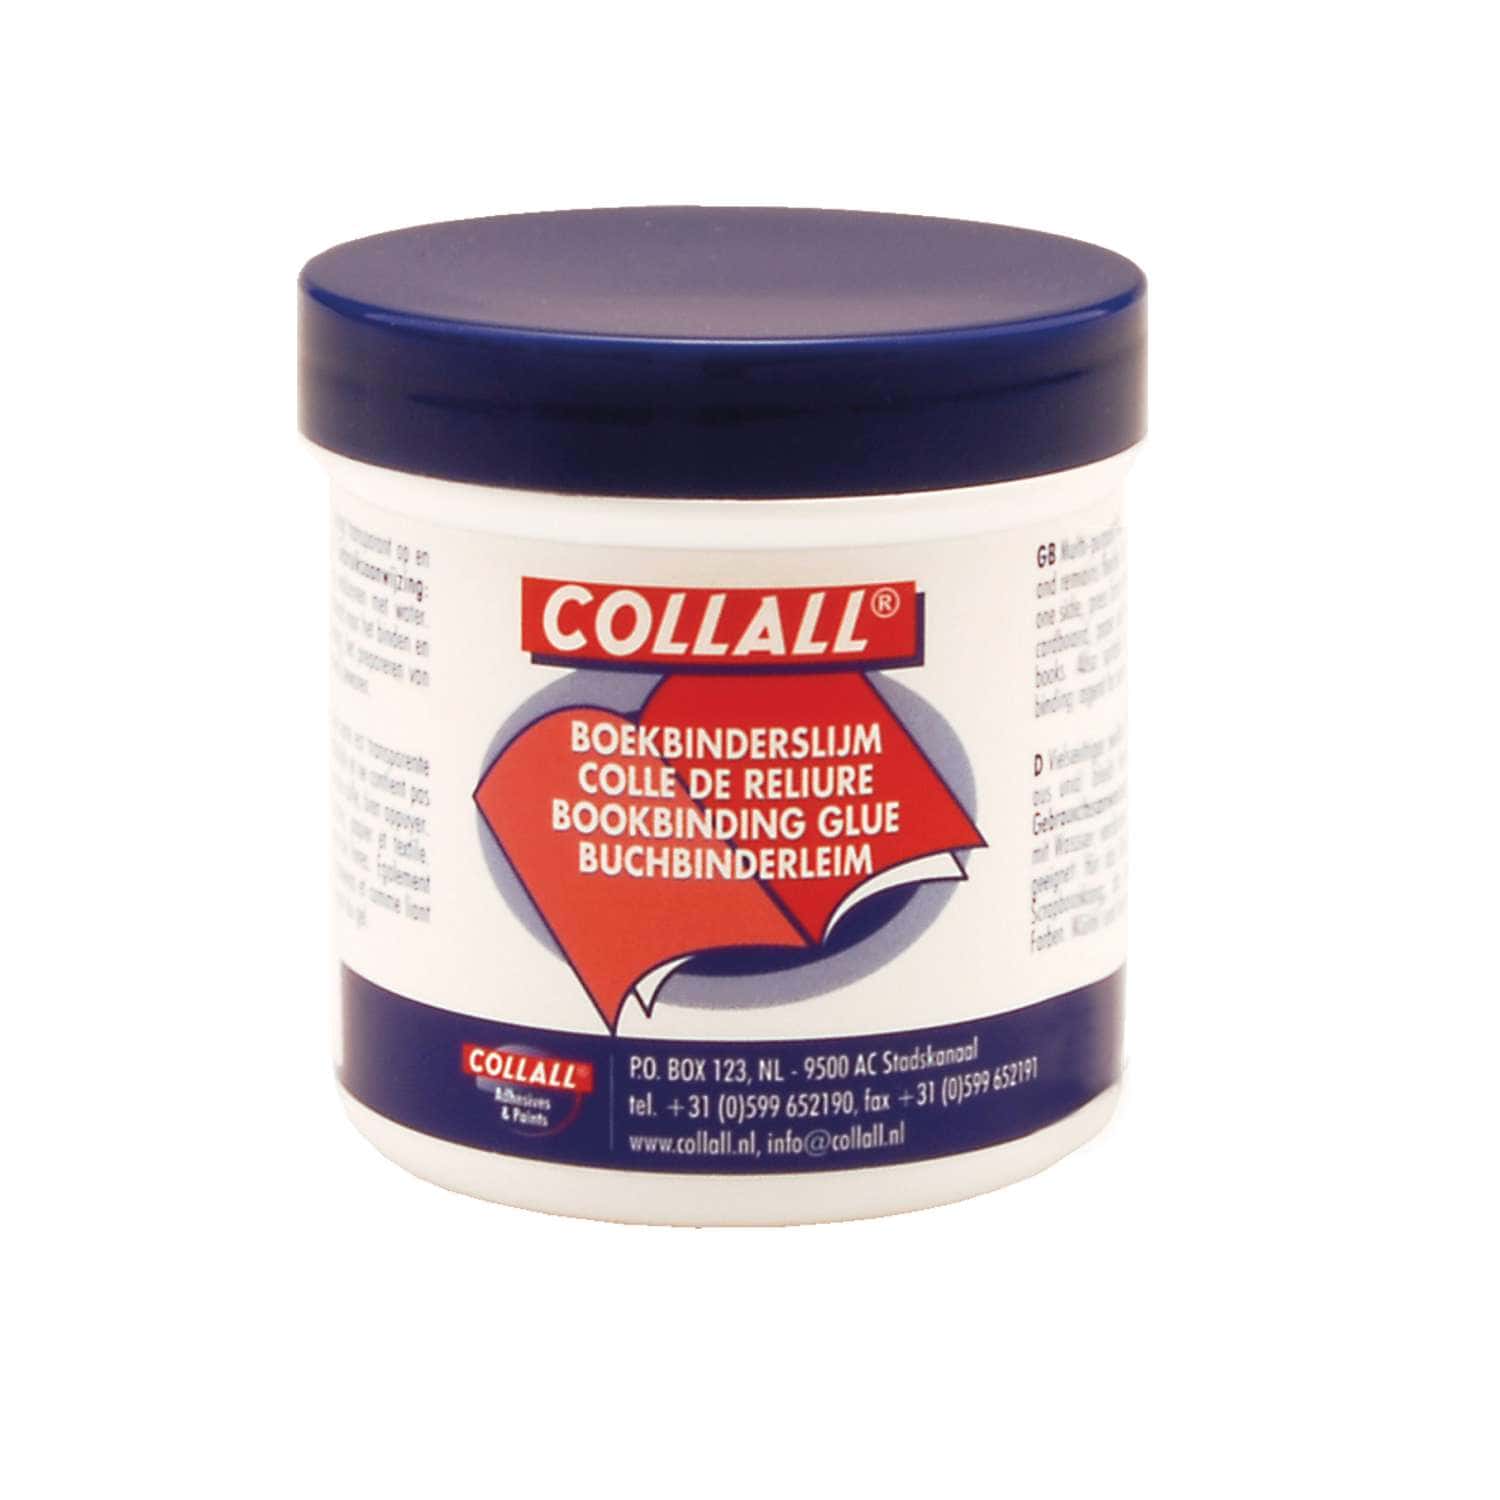 Collall Kids Eco Glue - Collall